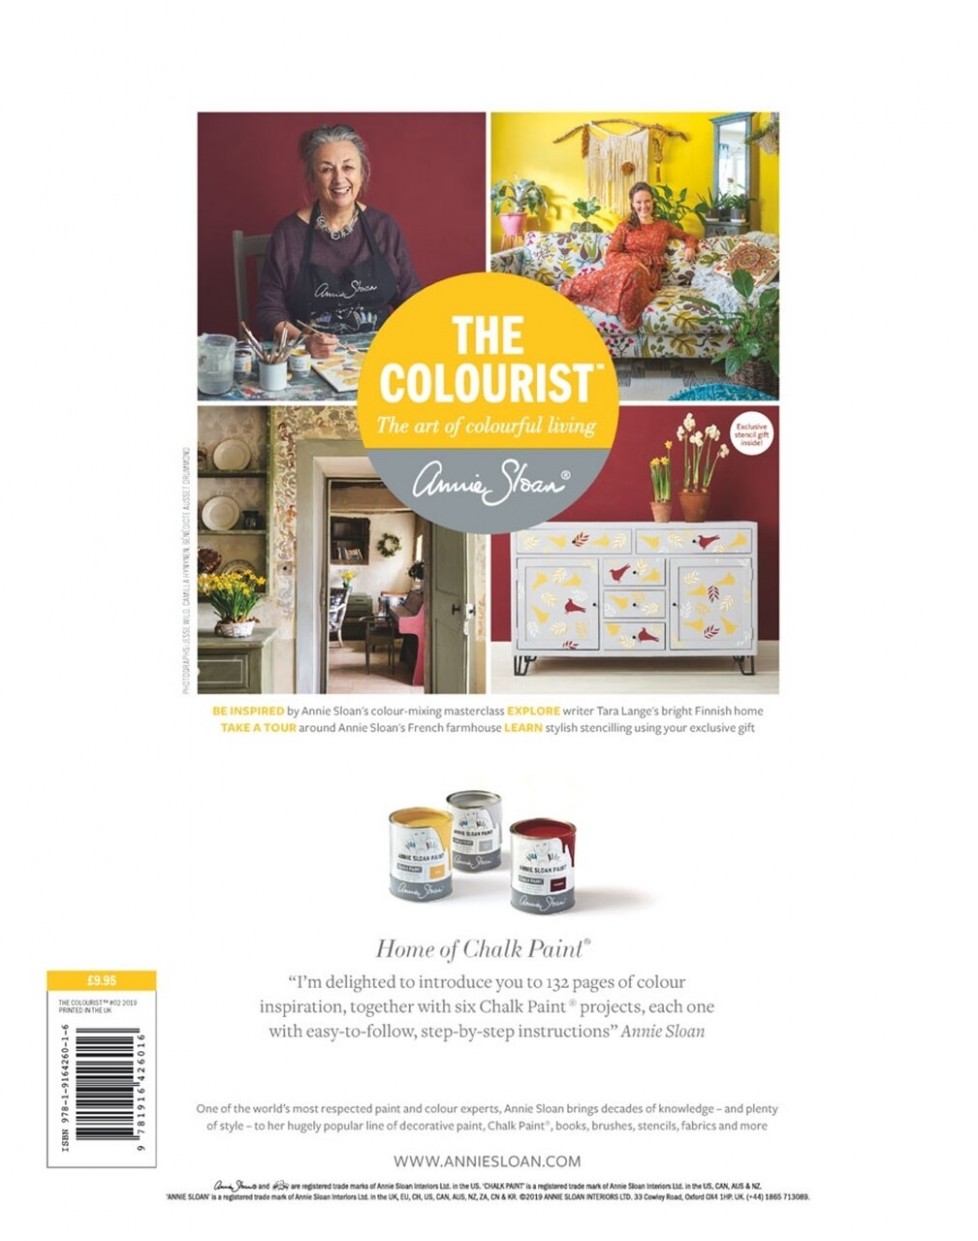 The Colourist Issue 7 By Annie Sloan Annie Sloan Chalk Paint New Colours